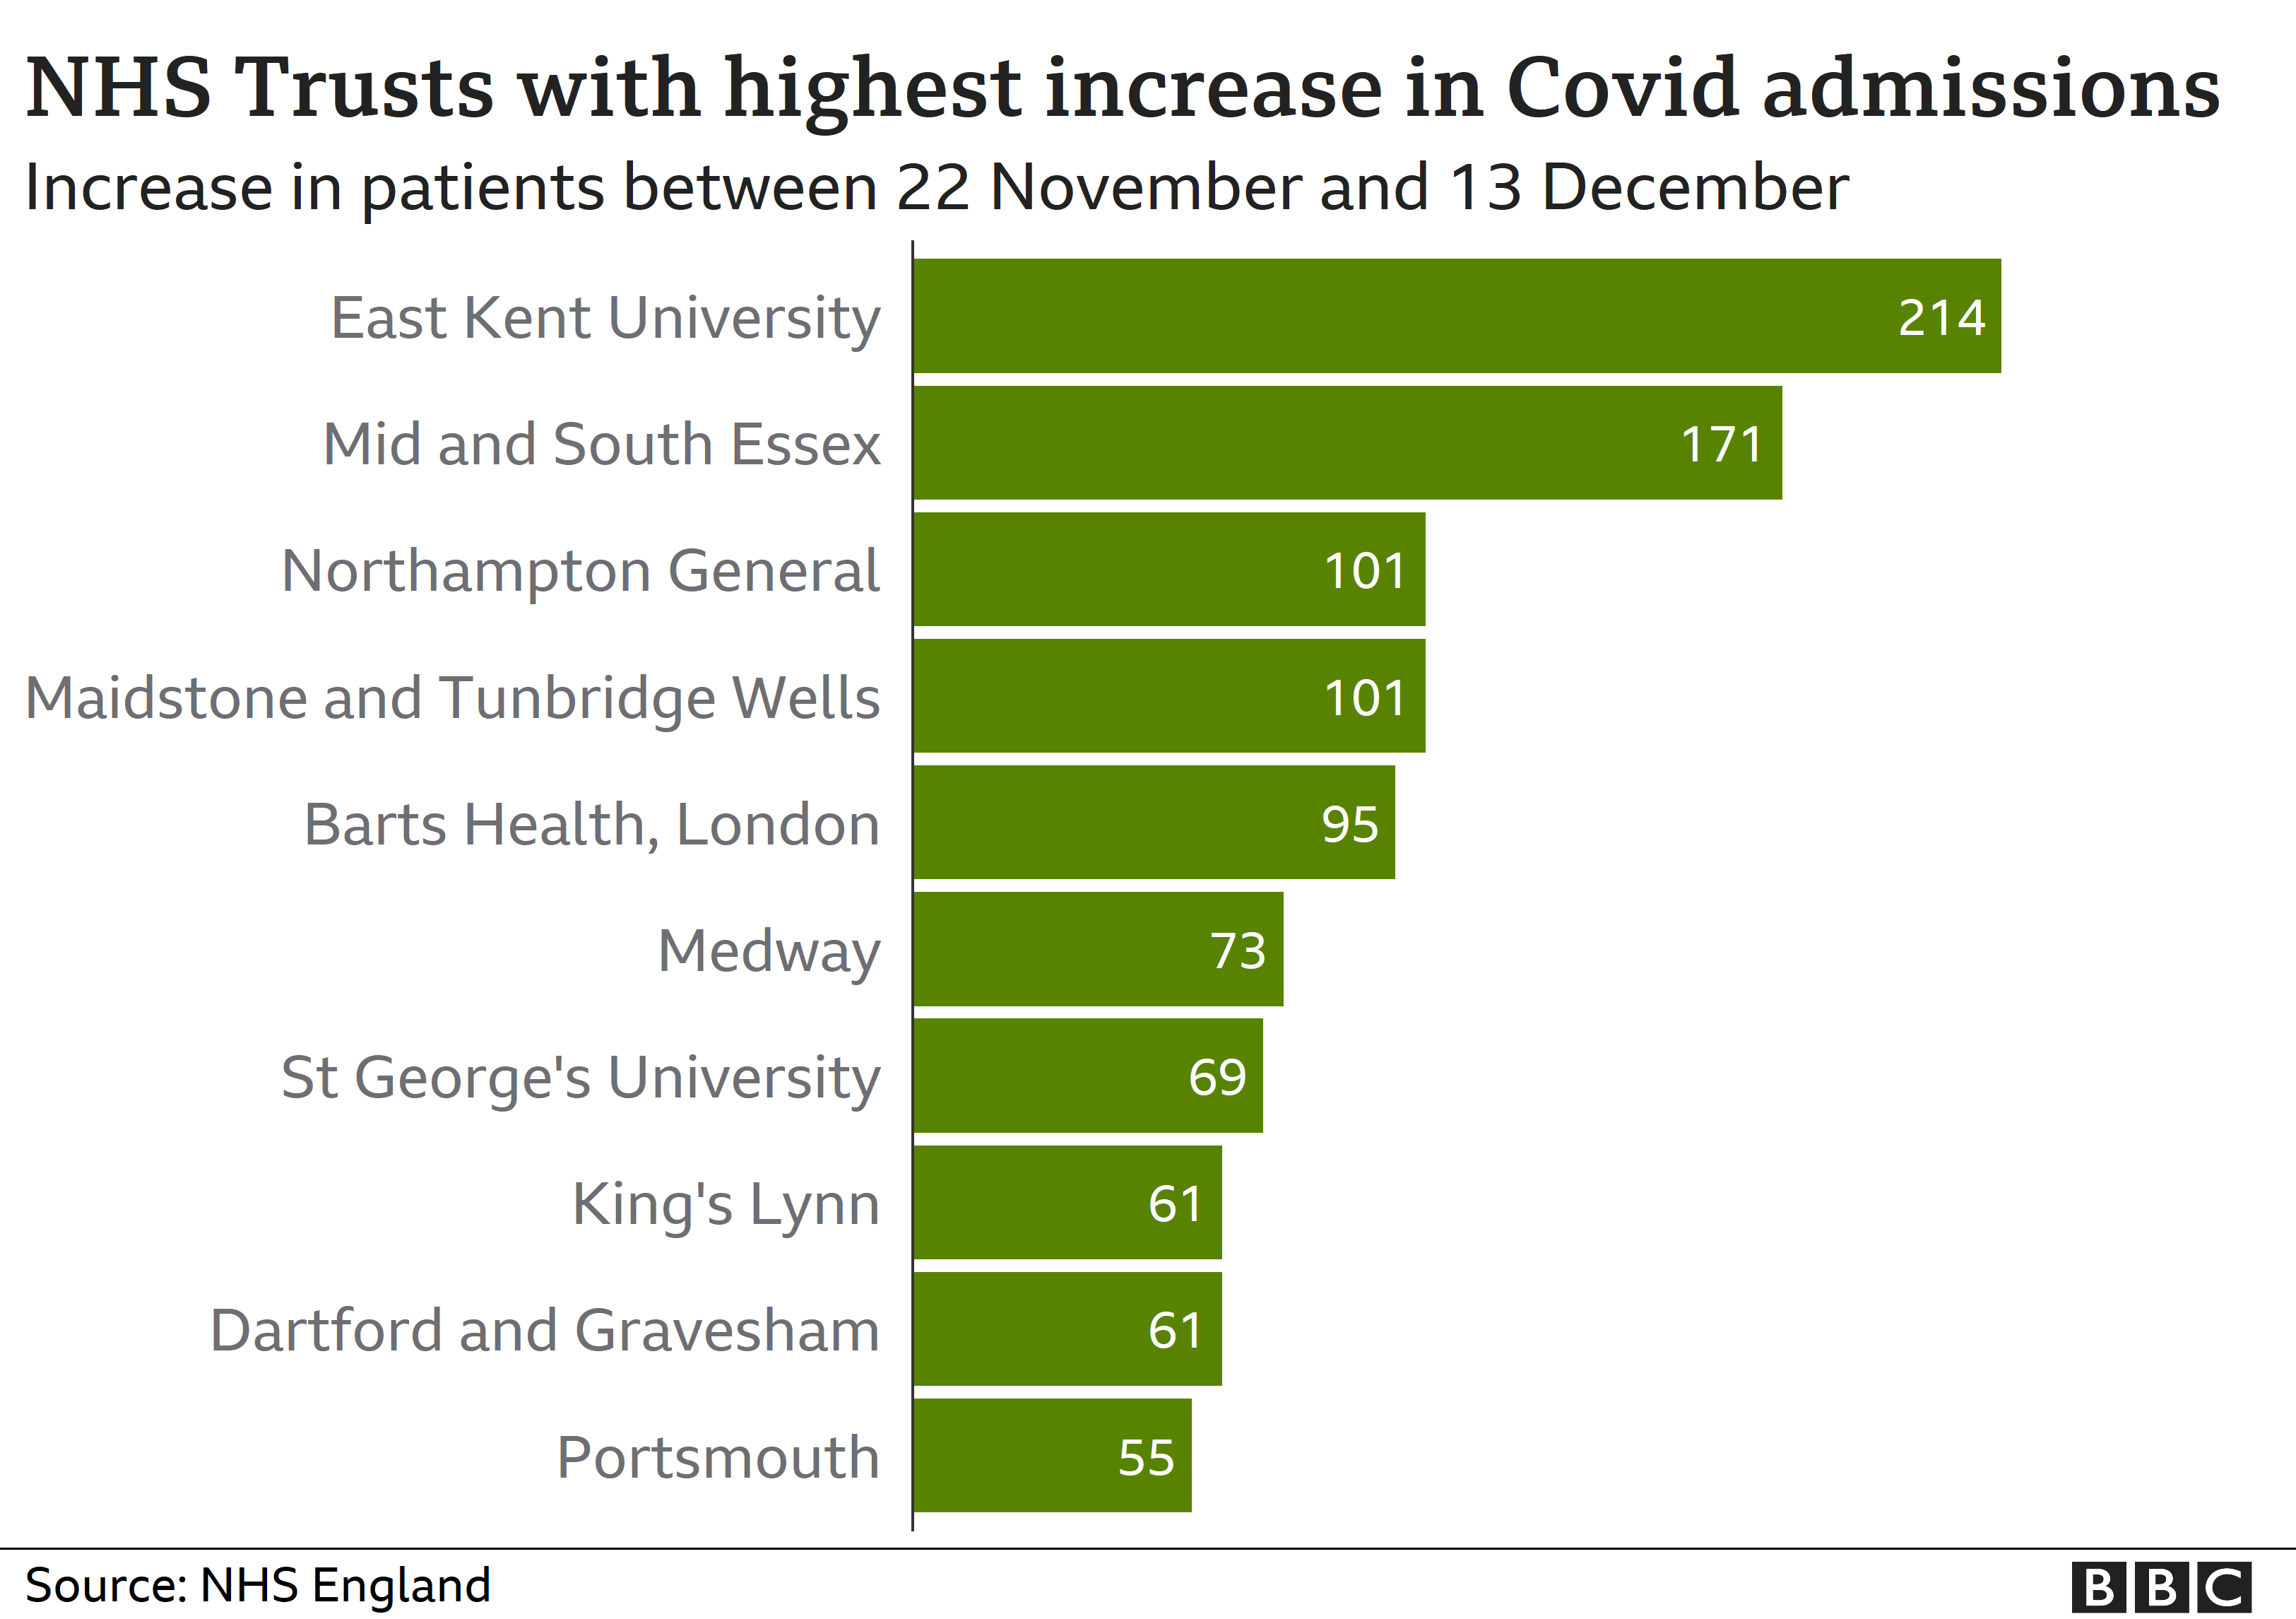 NHS trusts in England with largest increases in Covid admissions